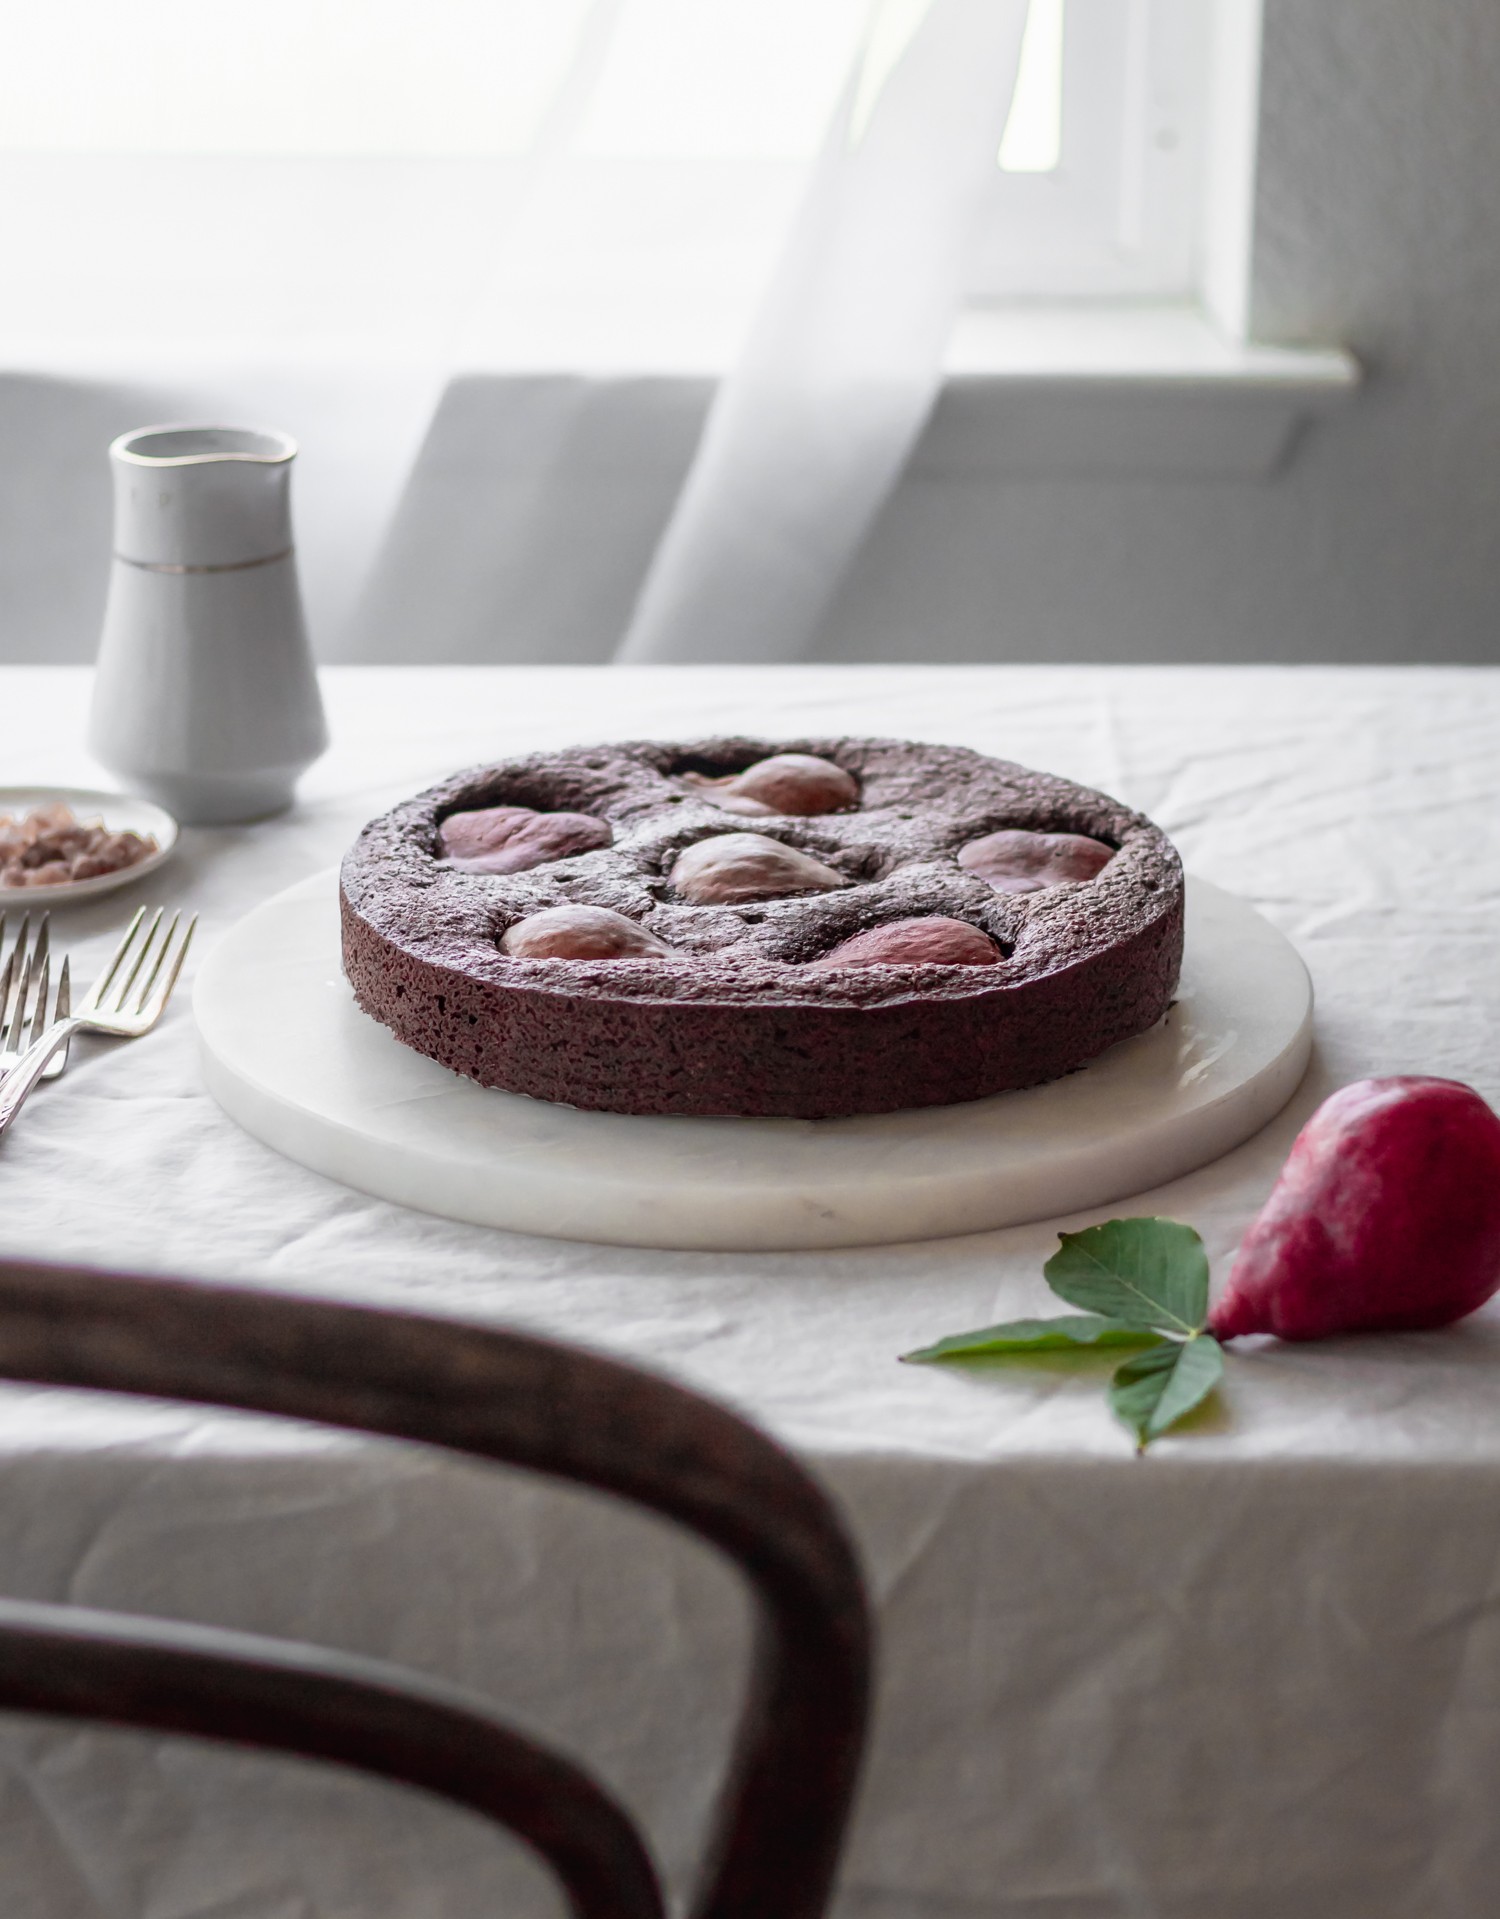 A side image of a flourless chocolate cake with red pears on a marble cake plate on a linen next to a red pear and vintage forks. In the background is a window with a white curtain